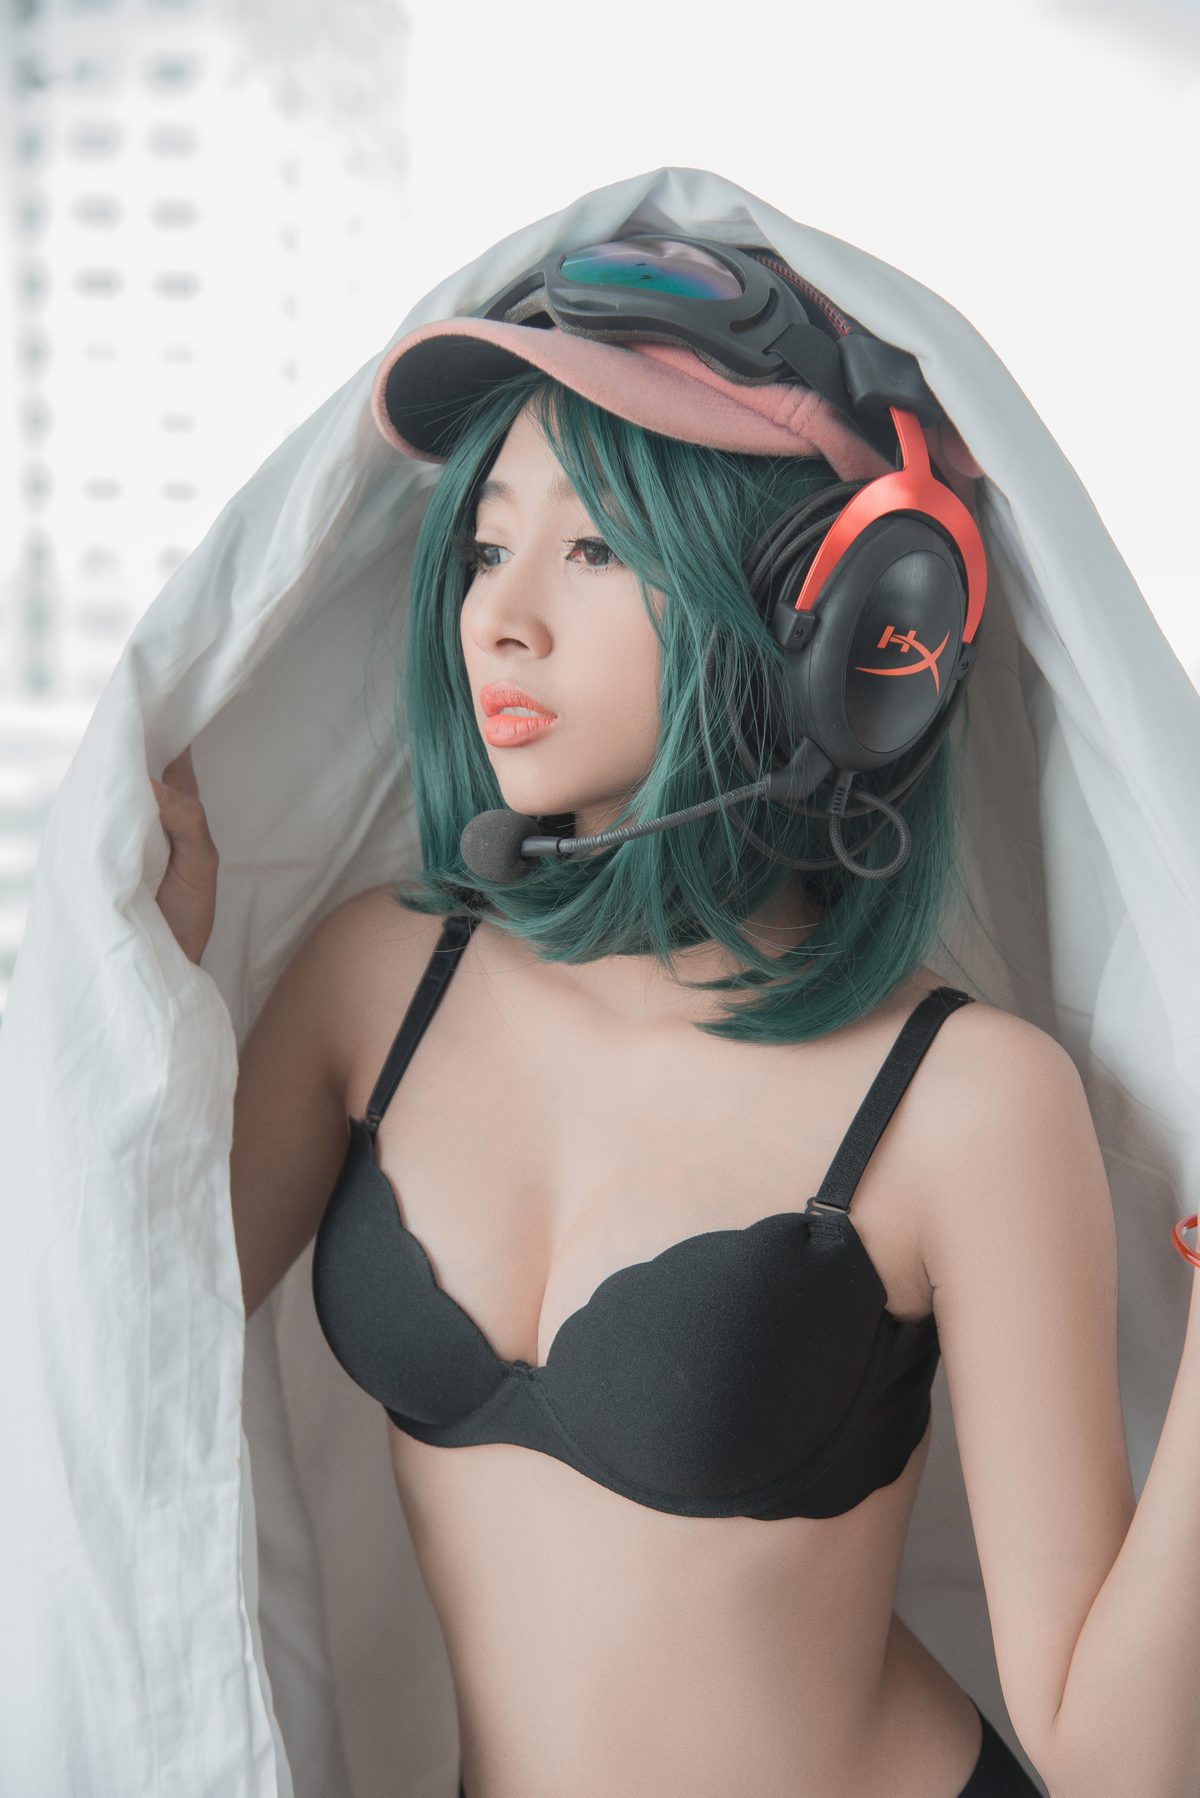 View - Coser@Mercury Nguyen - Vol.13 Full Collection - 